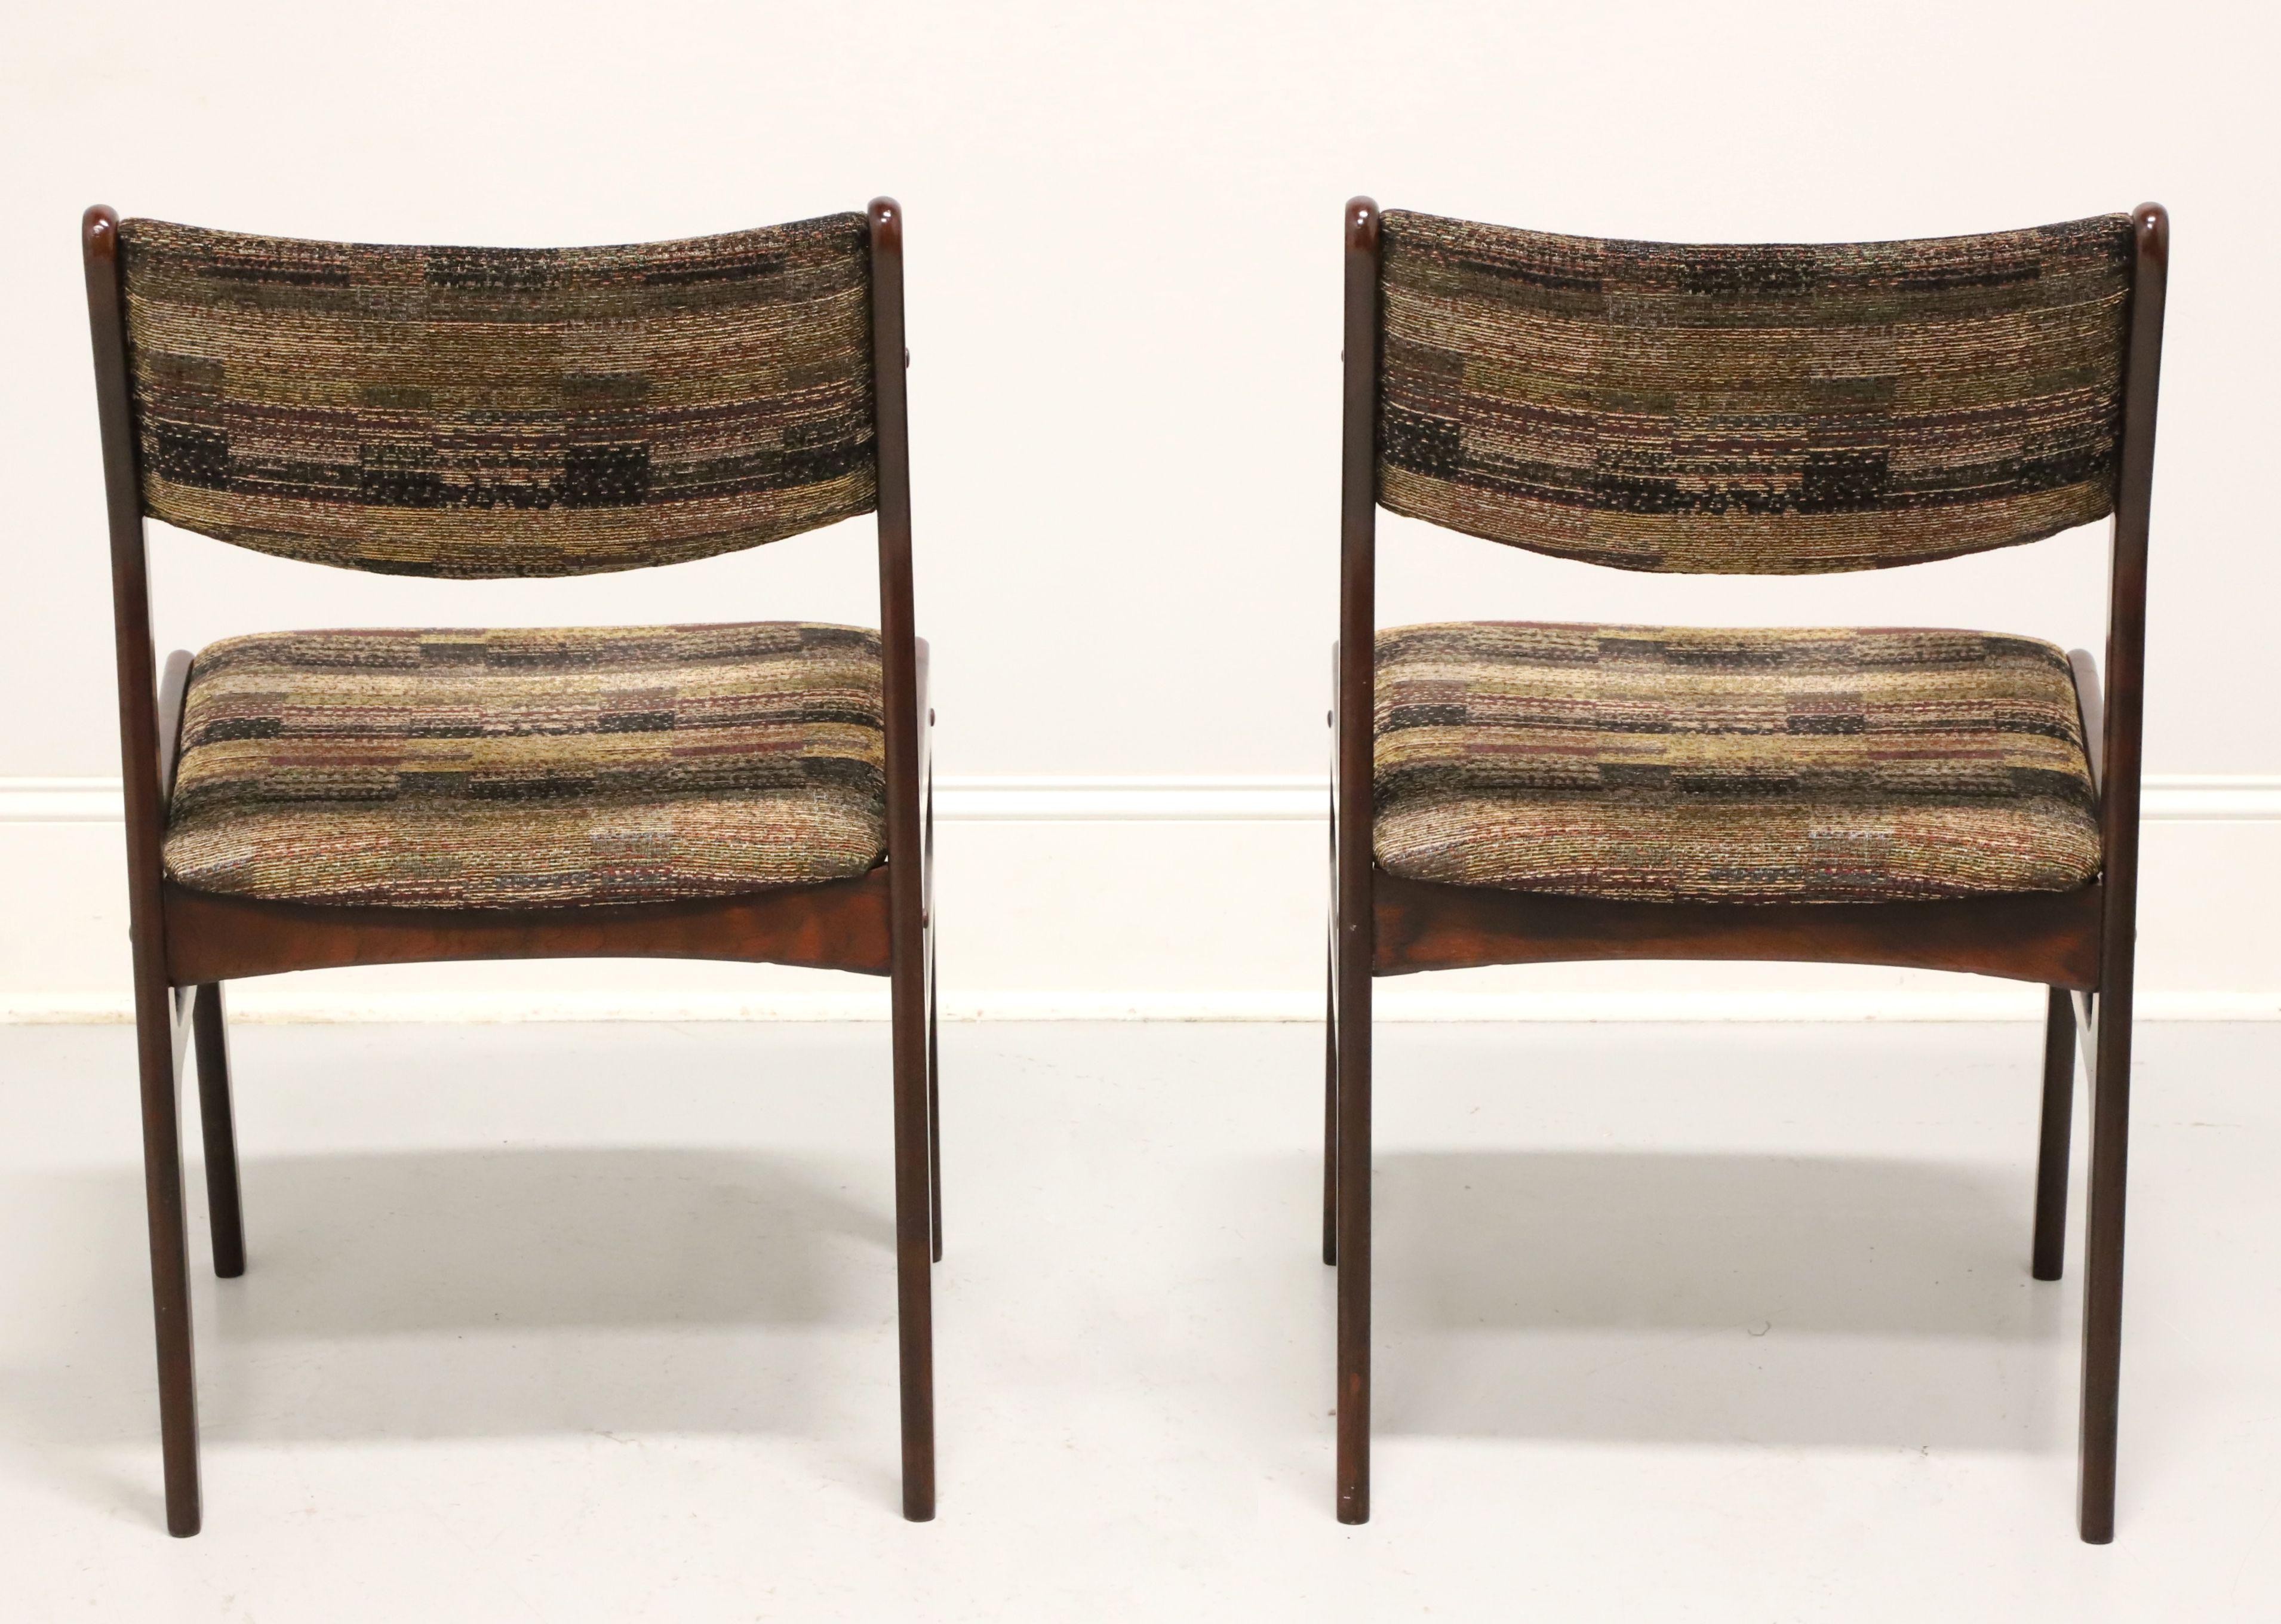 DYRLUND Mid 20th Century Rosewood Danish Modern Dining Side Chairs - Pair A In Good Condition For Sale In Charlotte, NC